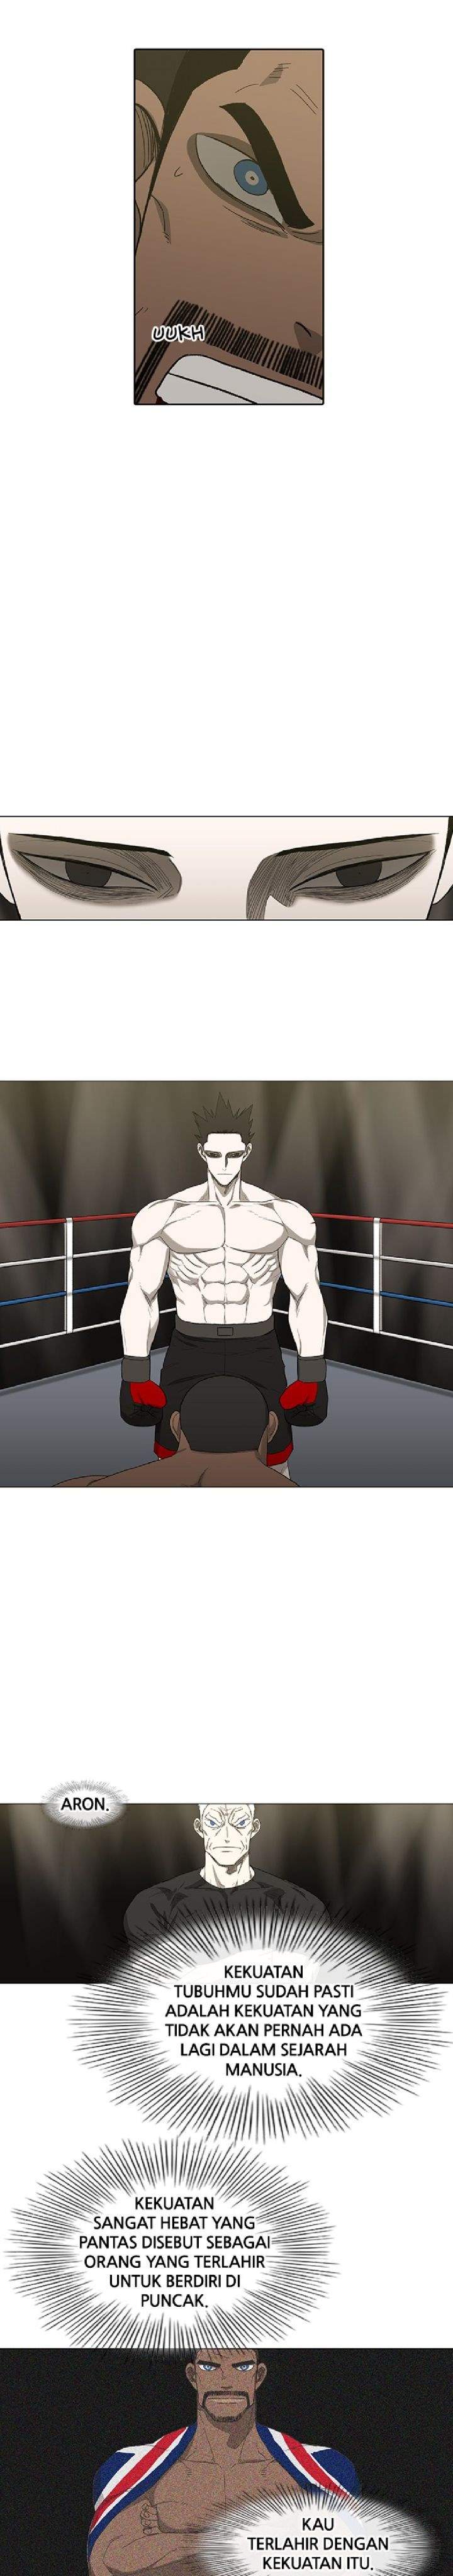 The Boxer Chapter 84